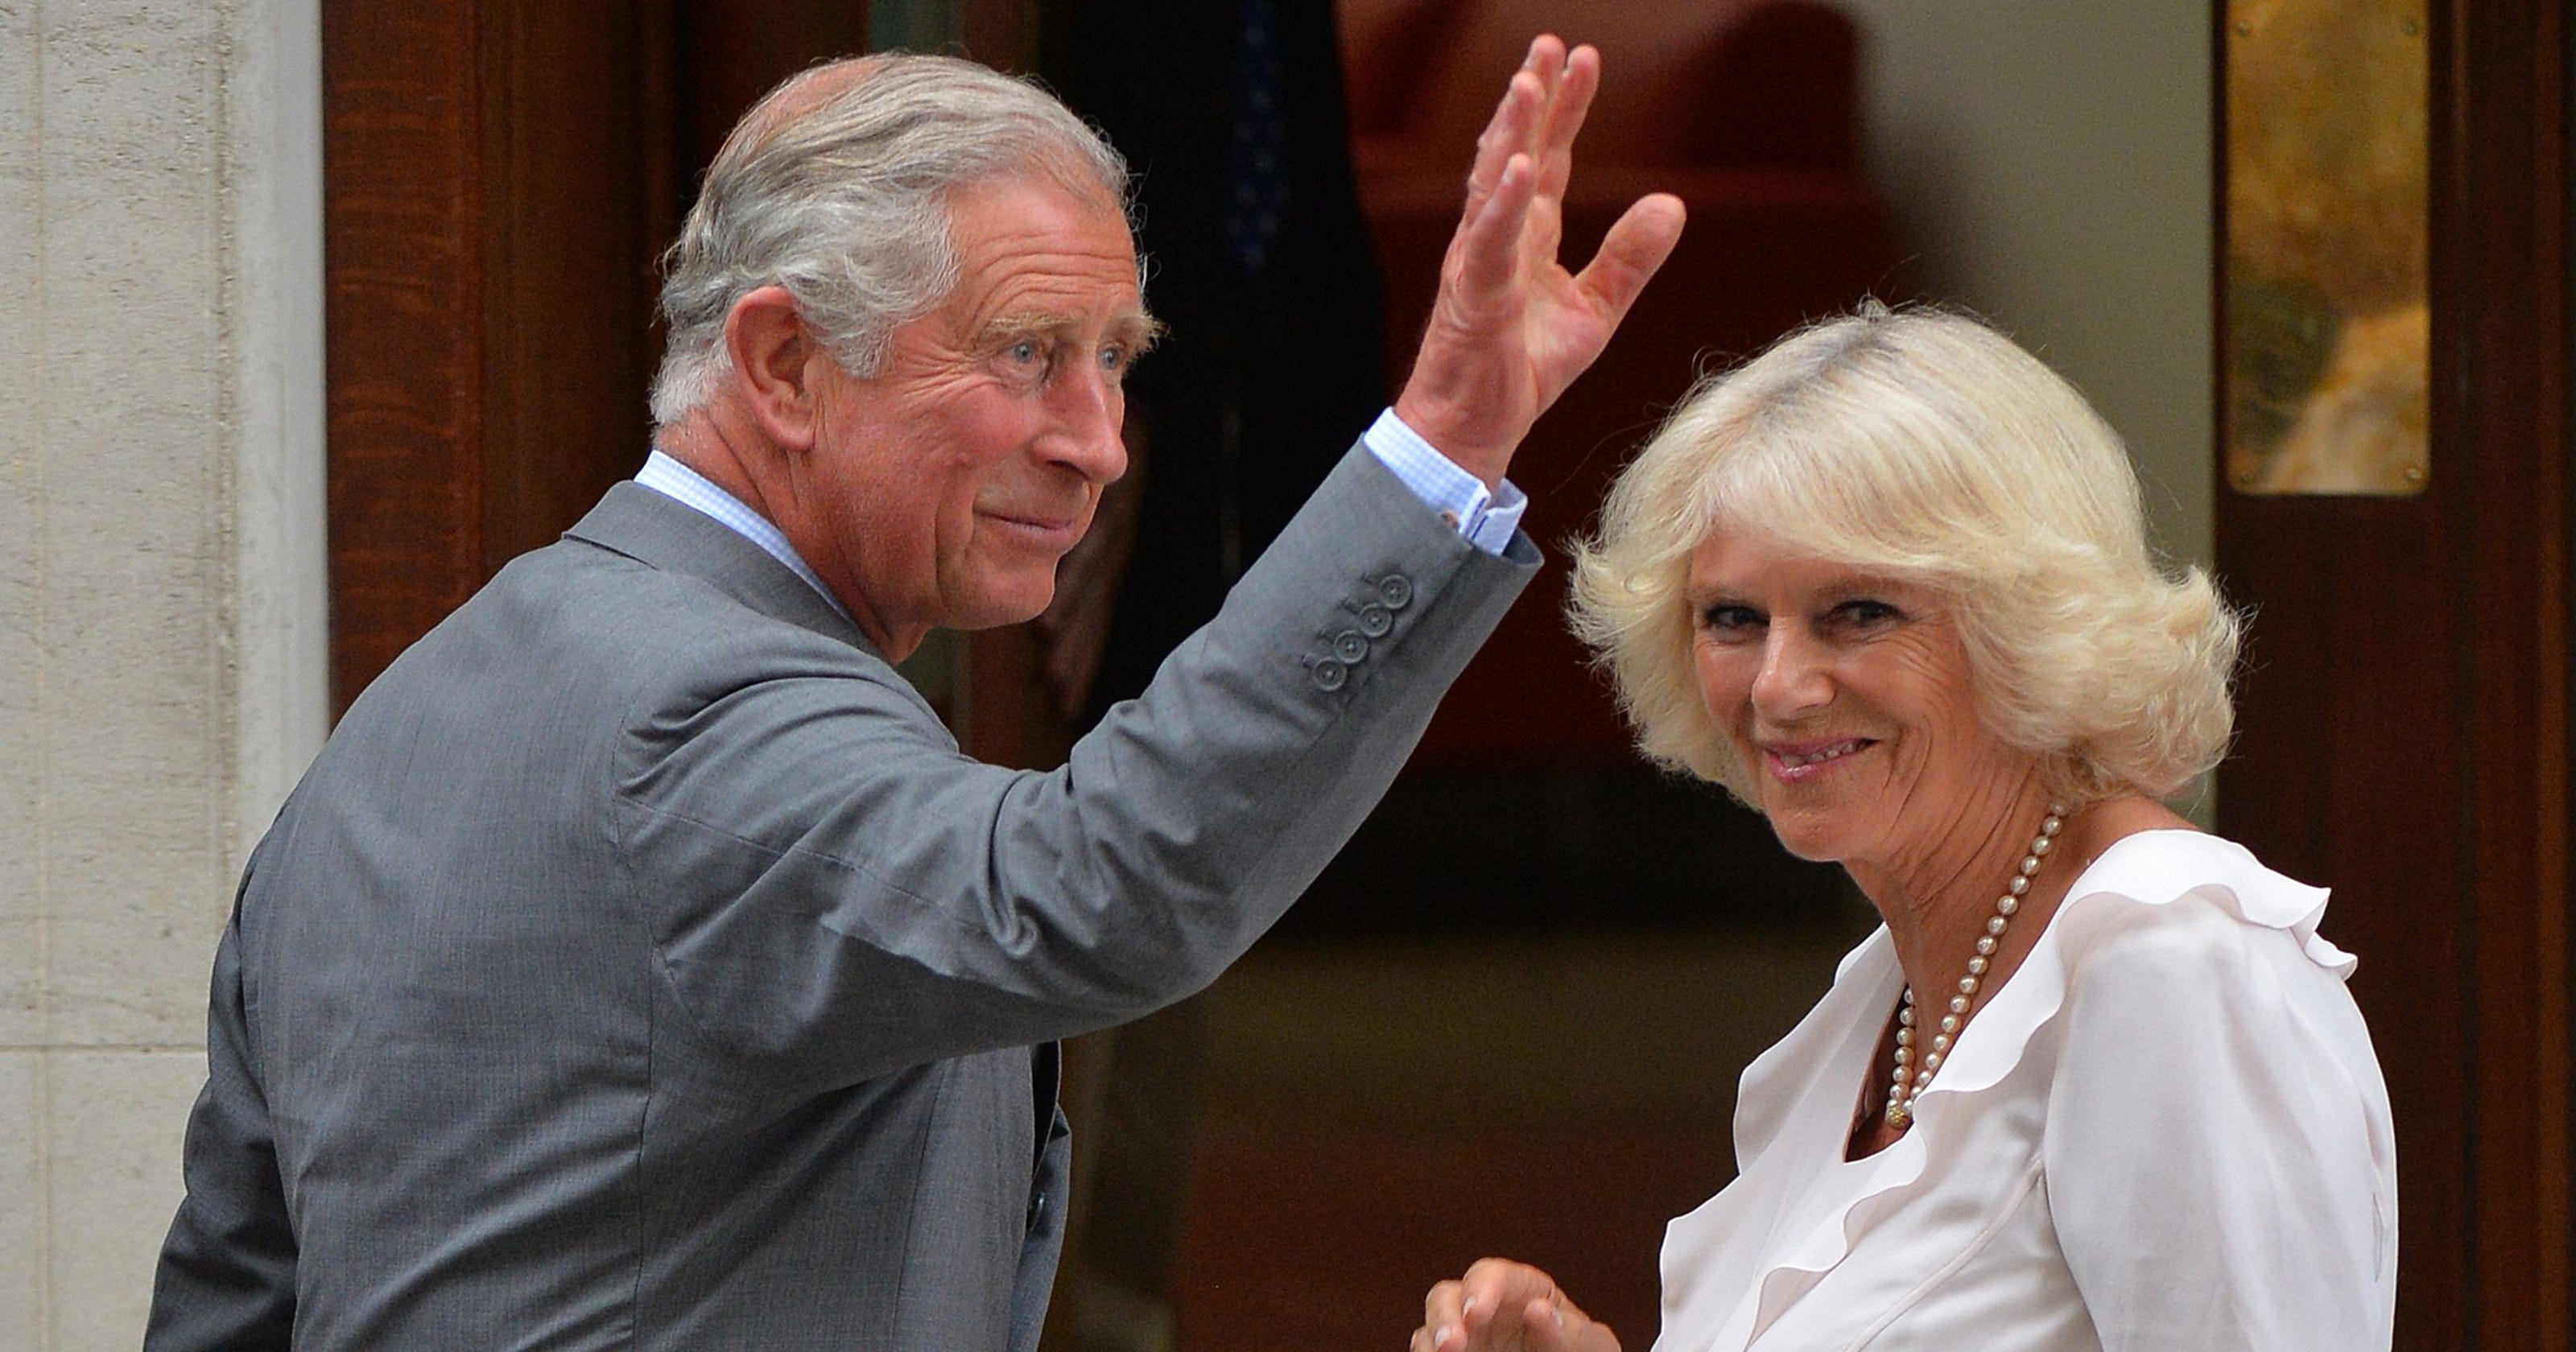 Prince Charles, Camilla arrive to visit his first grandchild